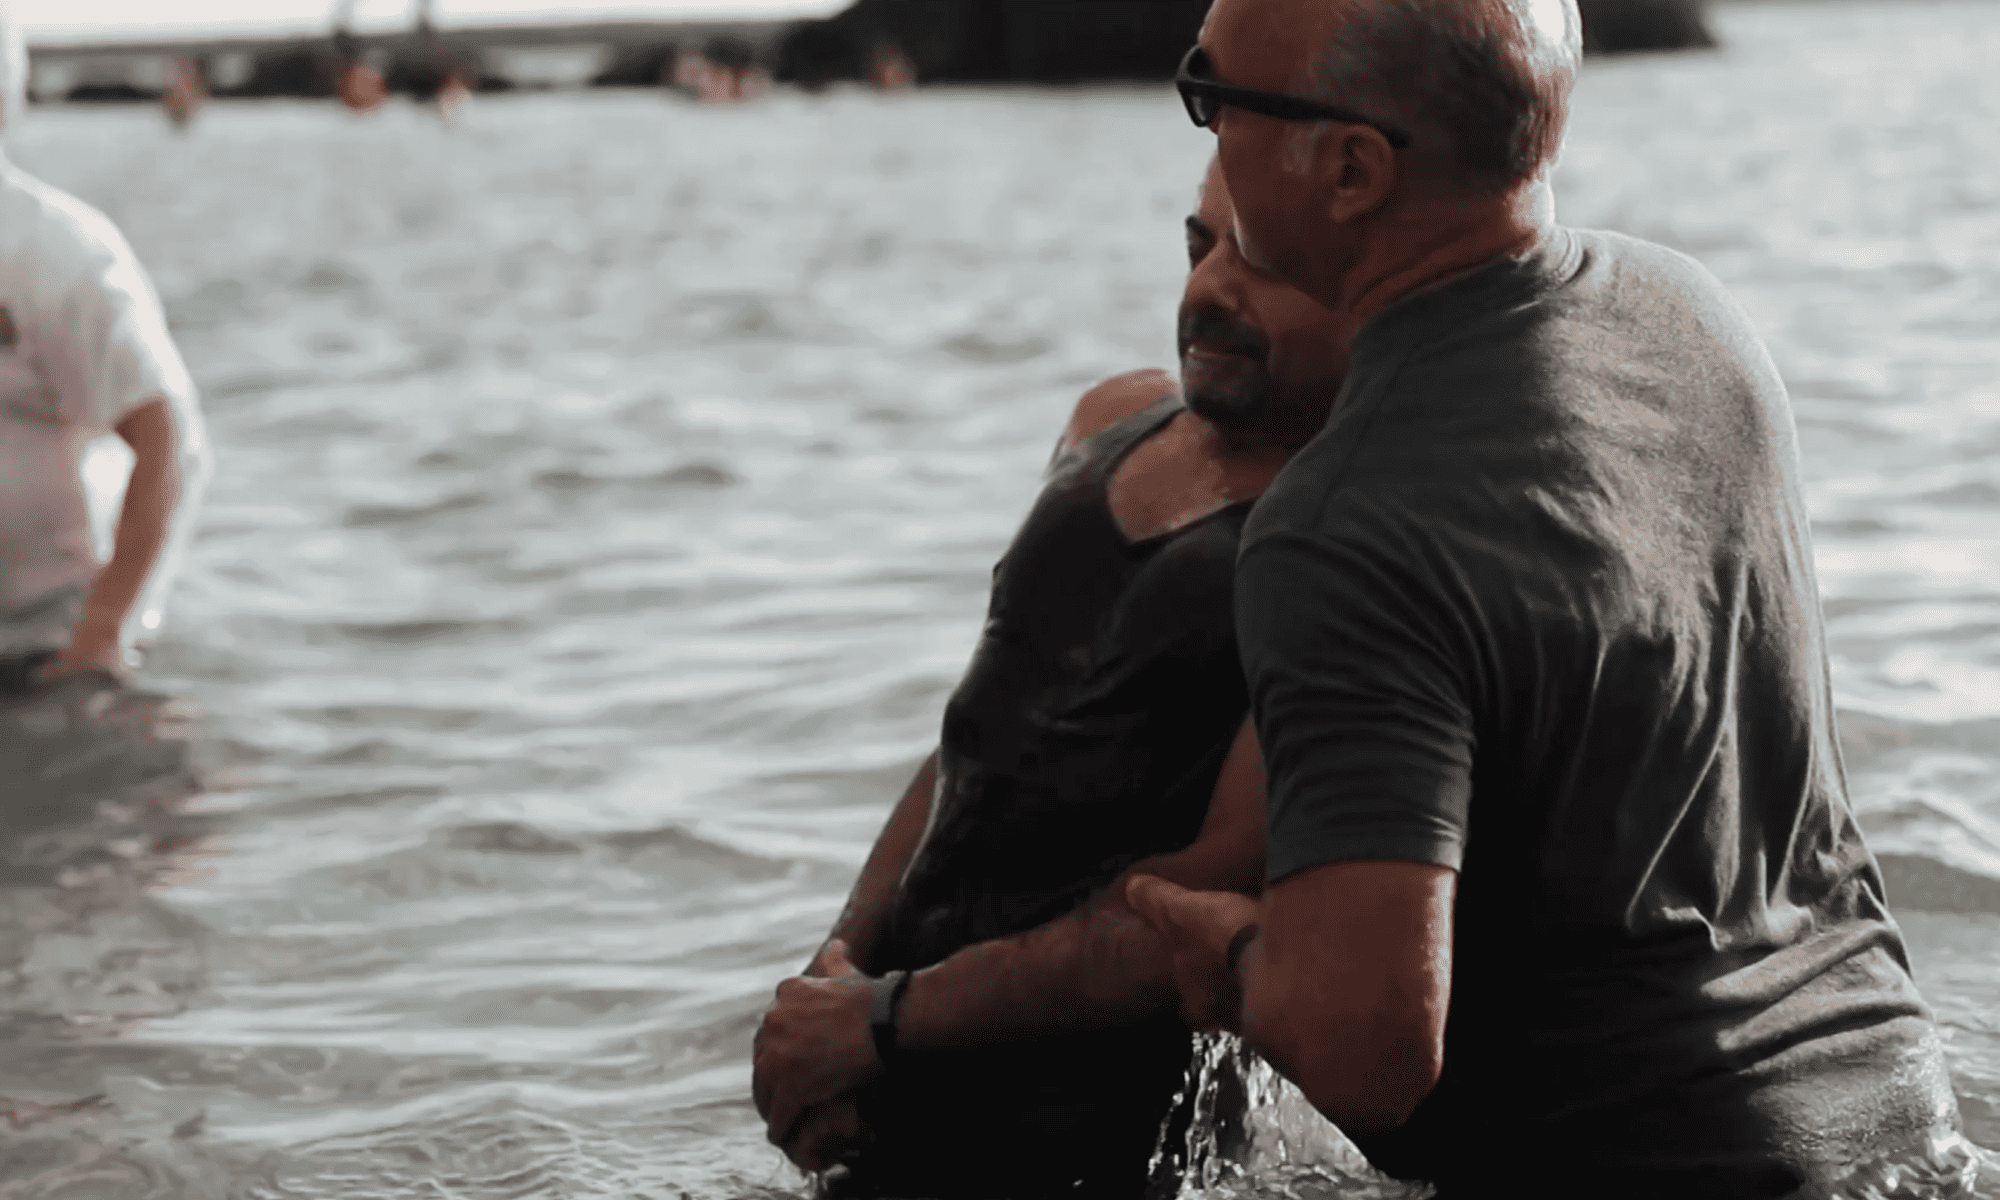 Greg Laurie baptizes man at Pirate's Cove beach in CA